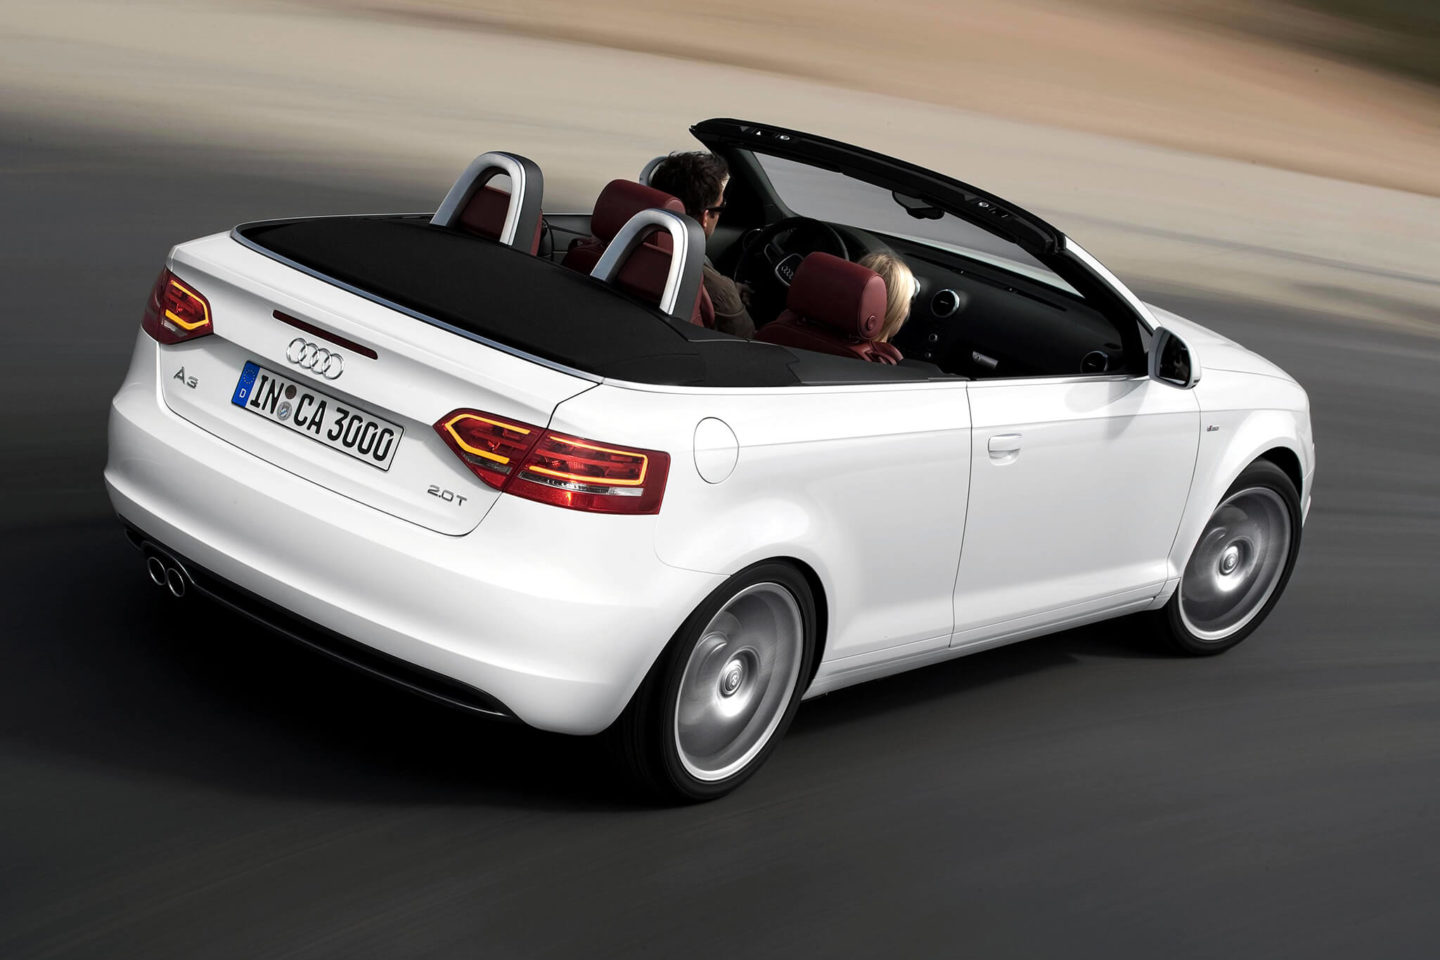 Aud A3 Cabriolet